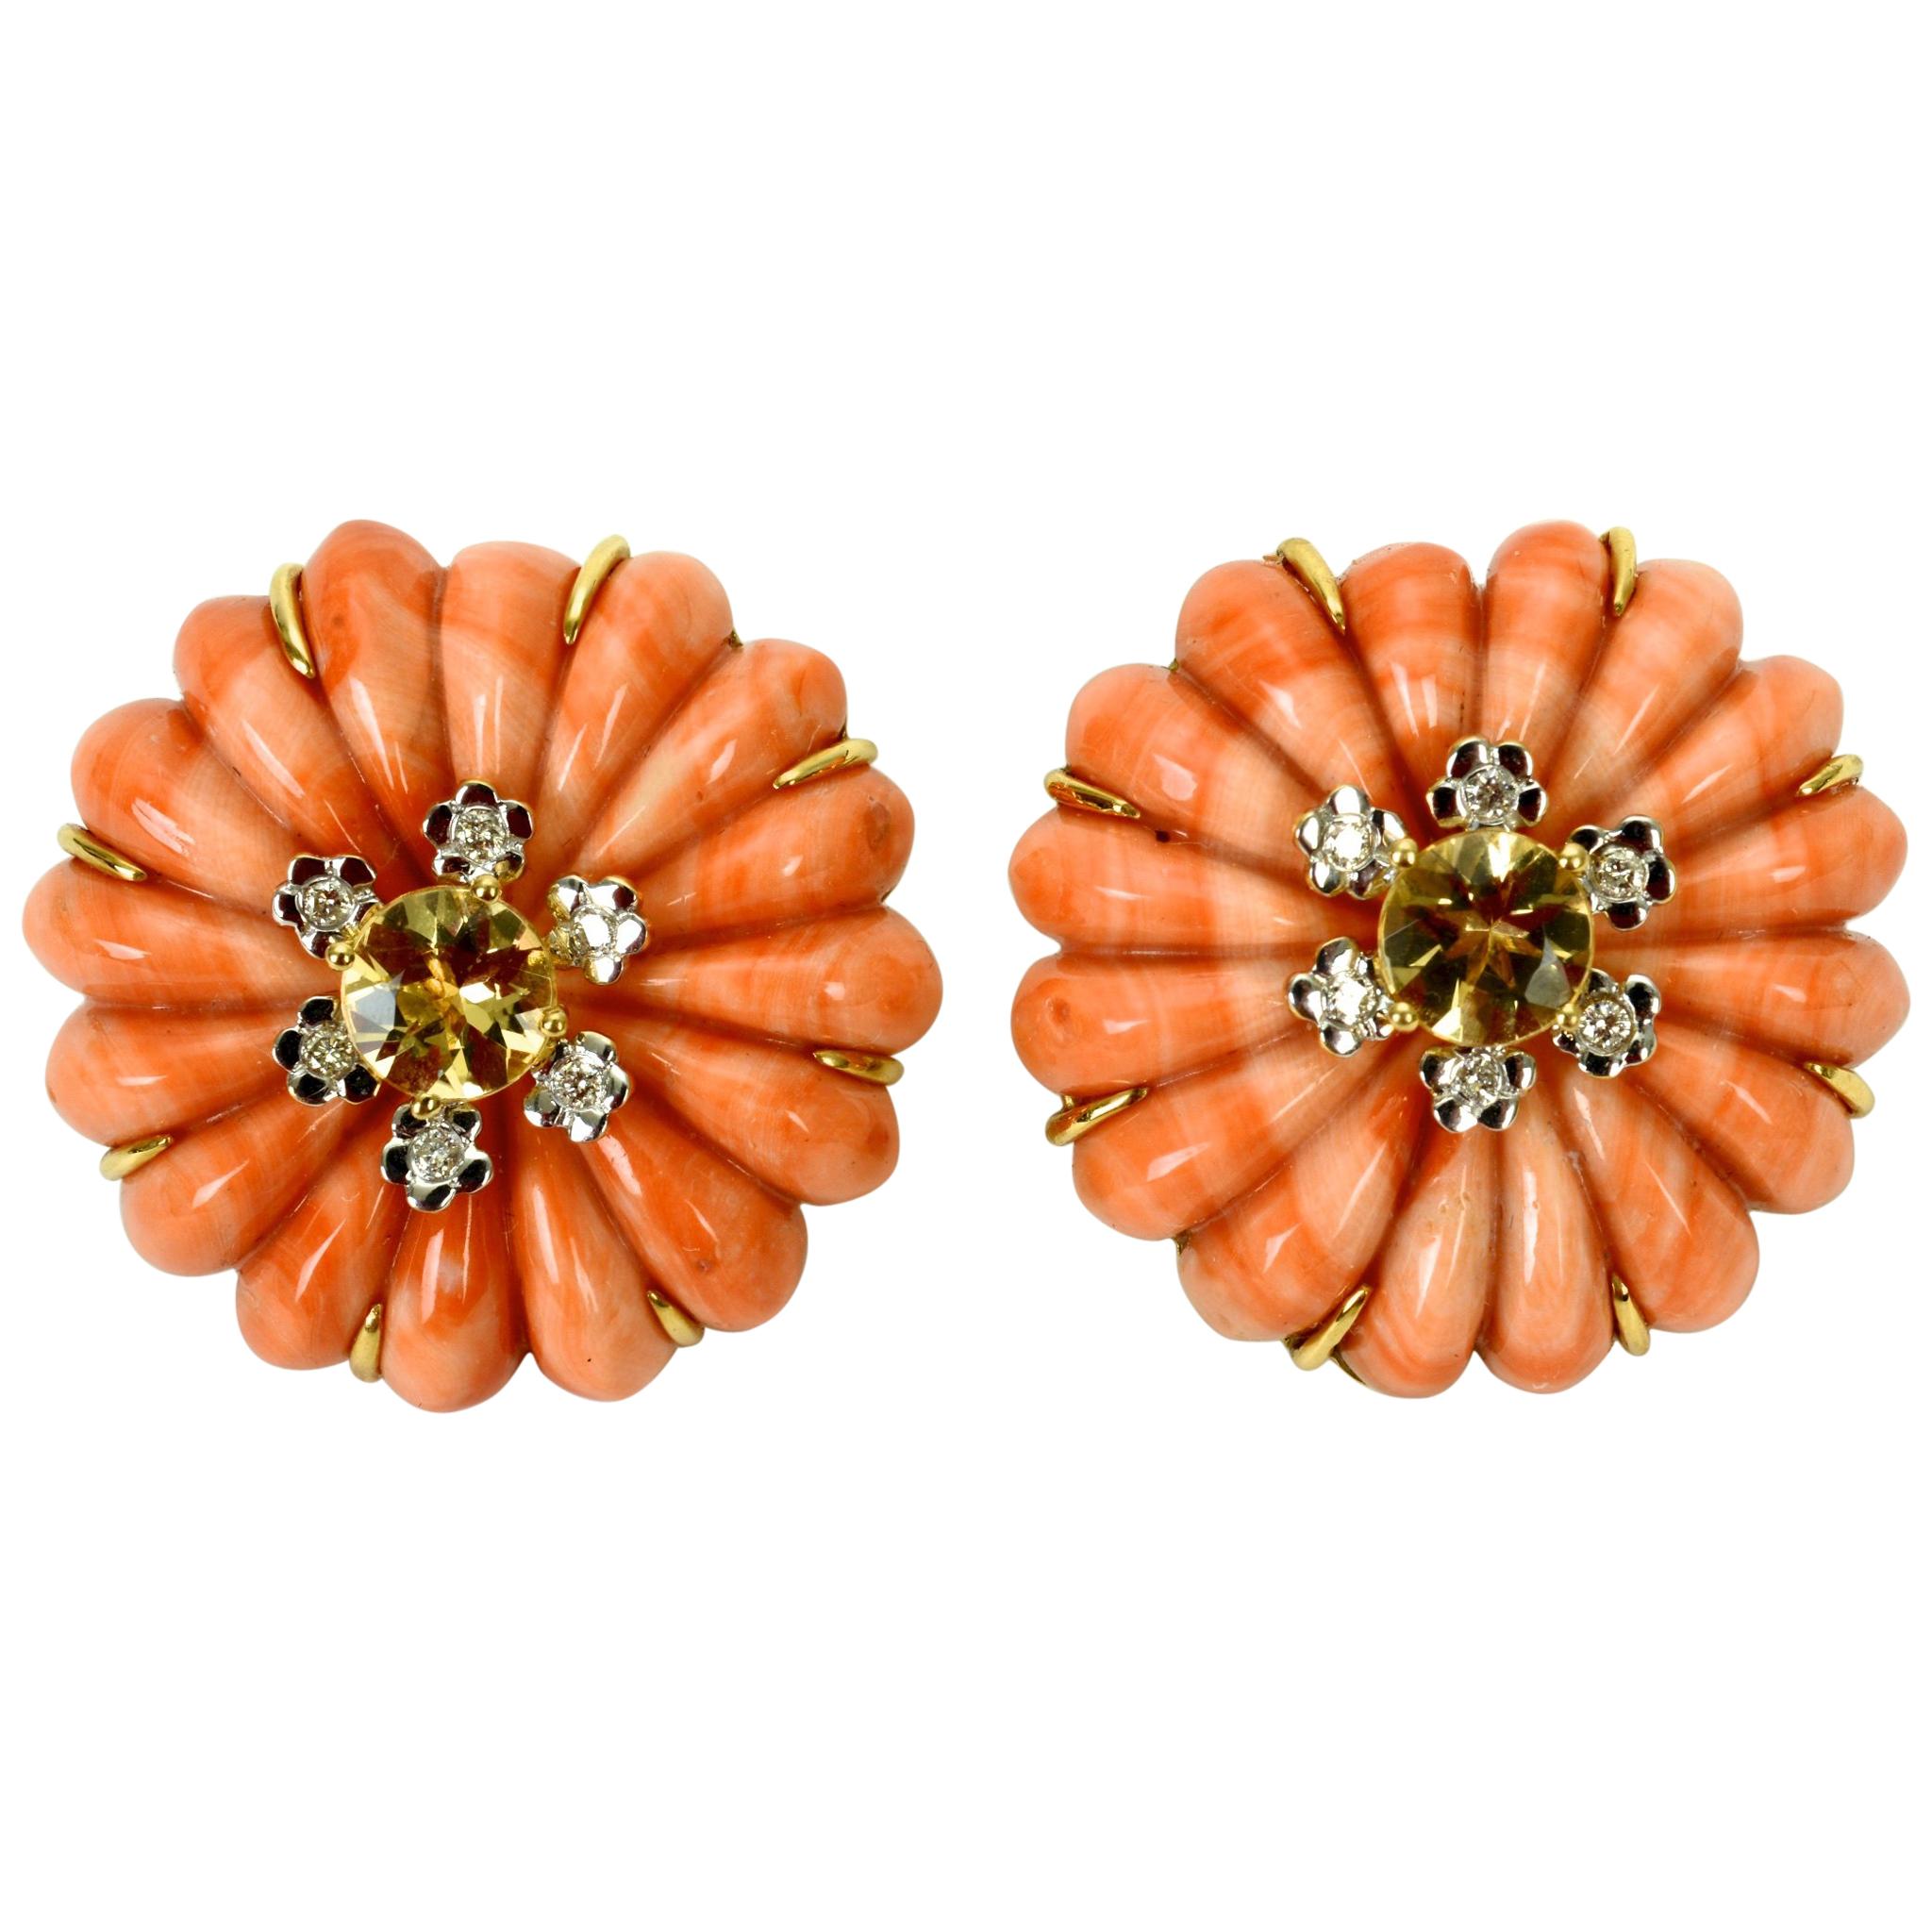 Pair of Carved Coral, Diamond and Citrine Earrings Set in 18 Karat Gold For Sale